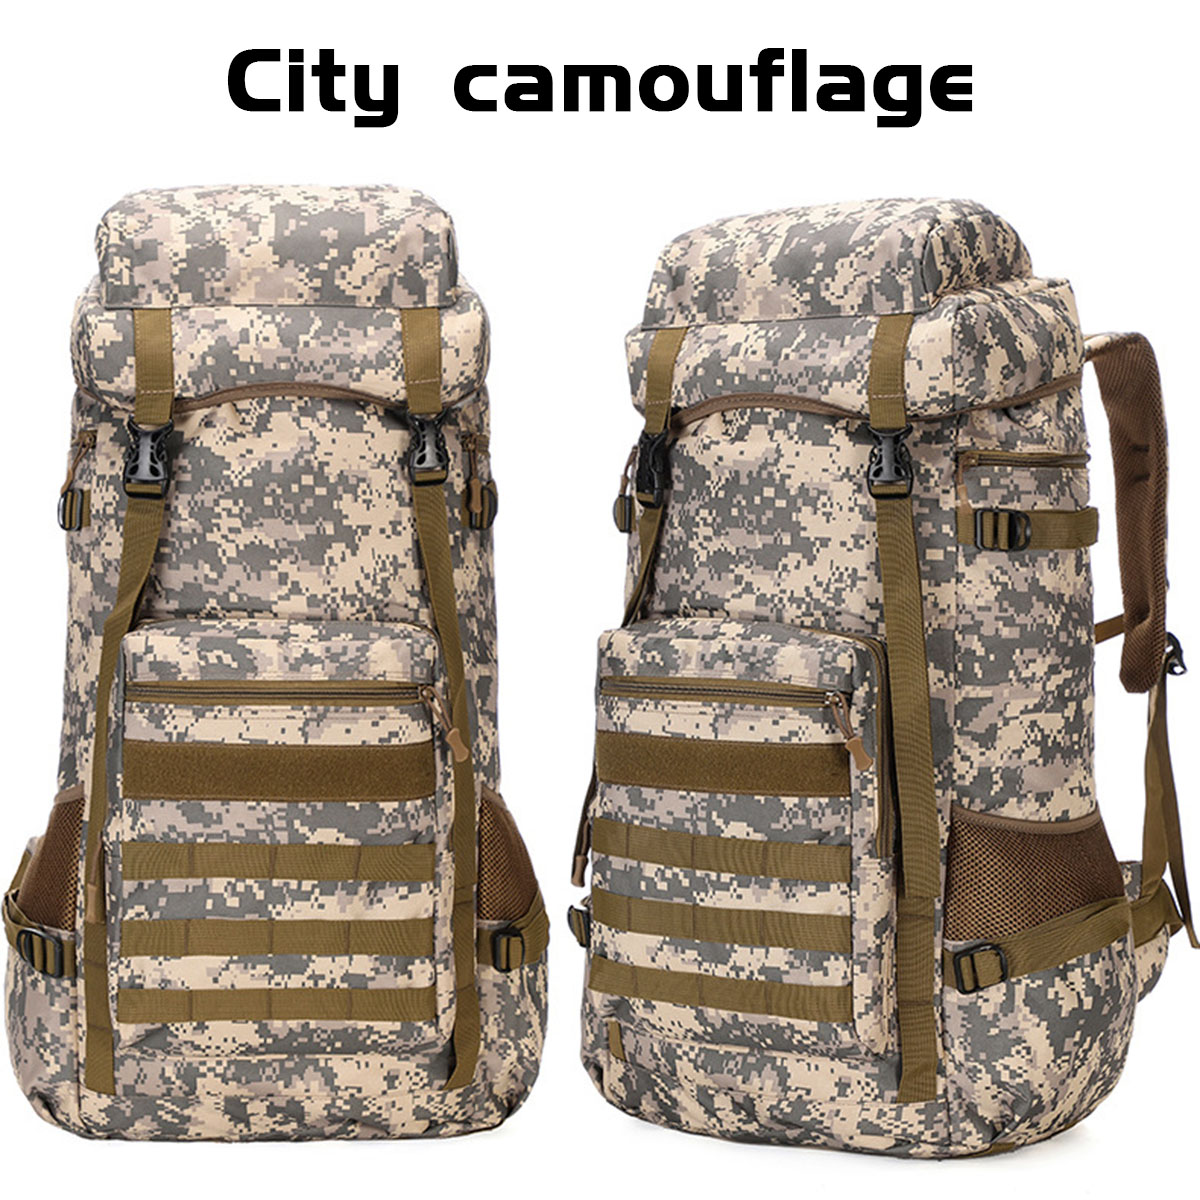 70L-Outdoor-Waterproof-Military-Tactical-Backpack-Camping-Hiking-Backpack-Trekking-Camouflage-Travel-1759458-13